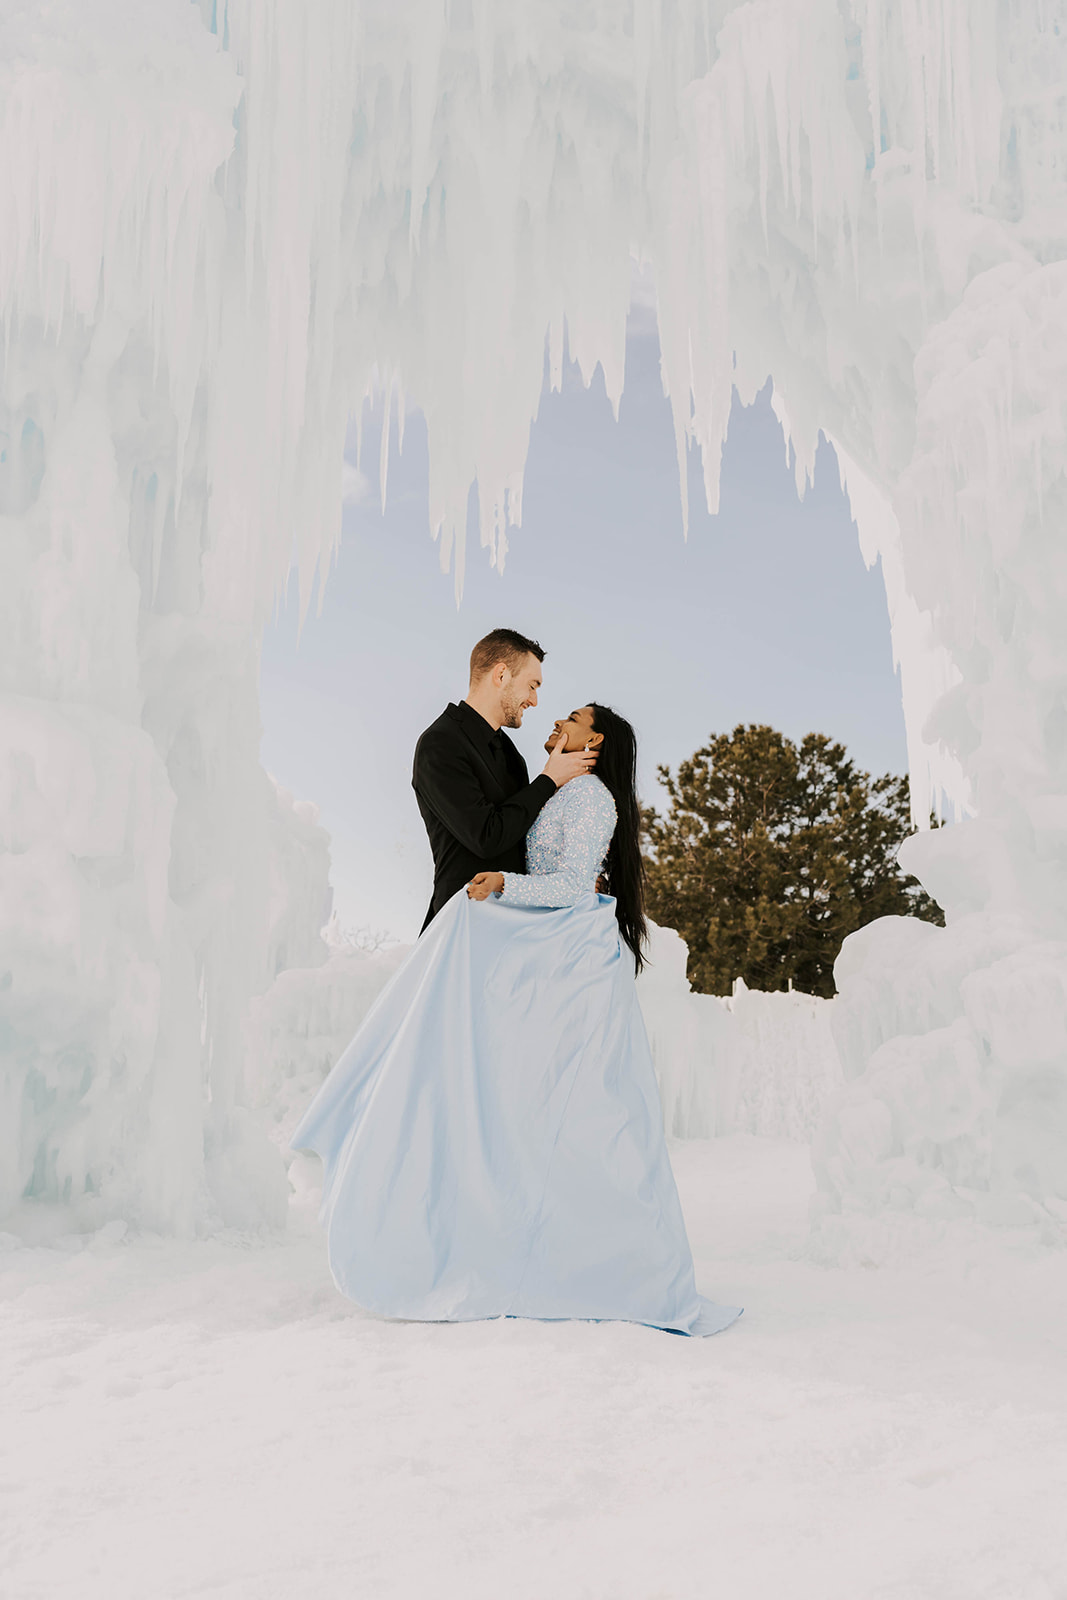 Winter engagement photos at ice castles